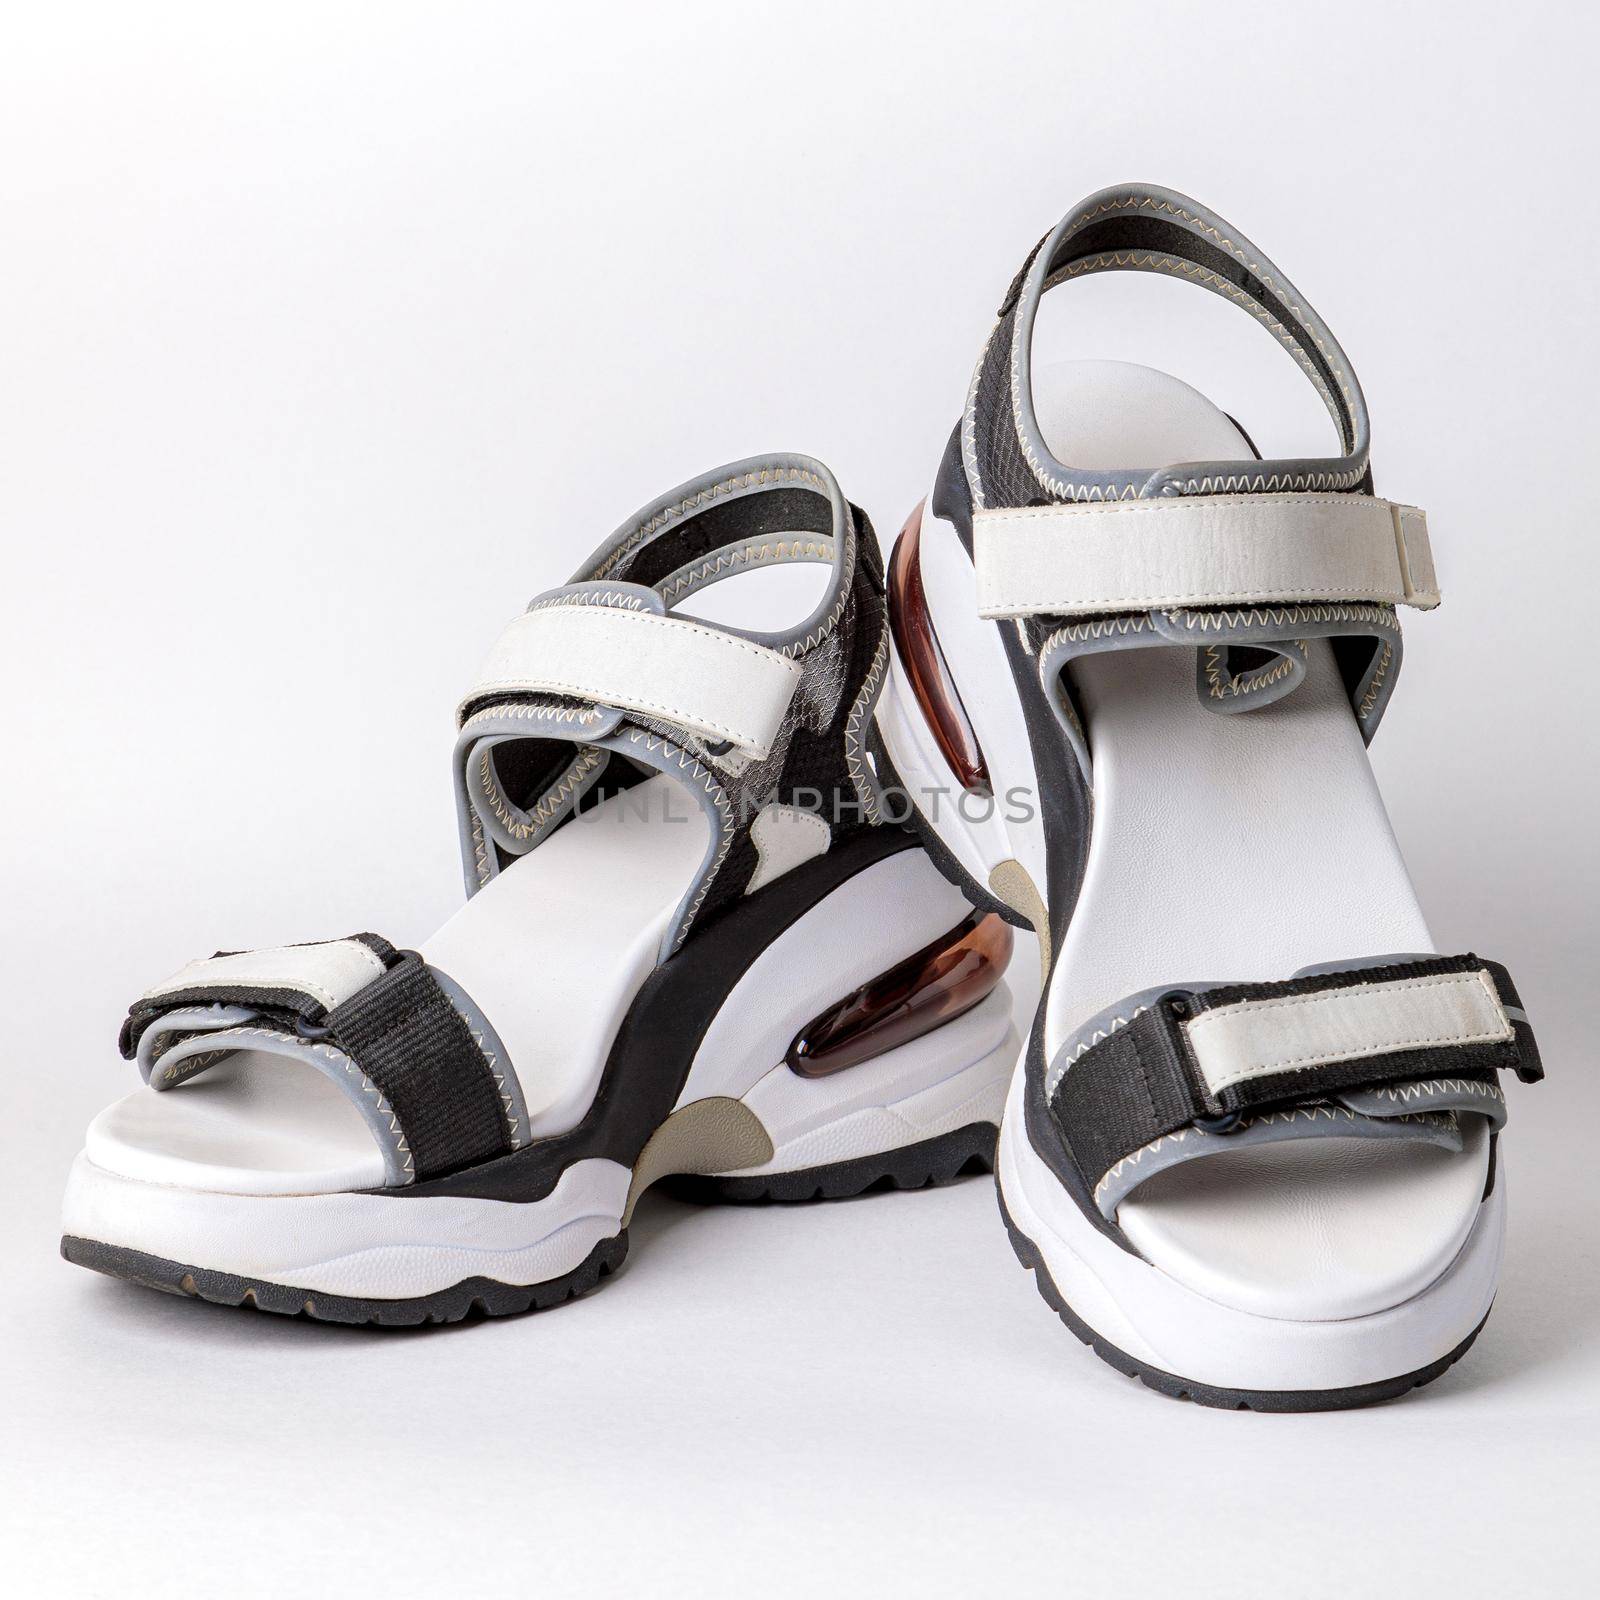 Women's, fashionable, sports sandals on a white background. by Yurich32